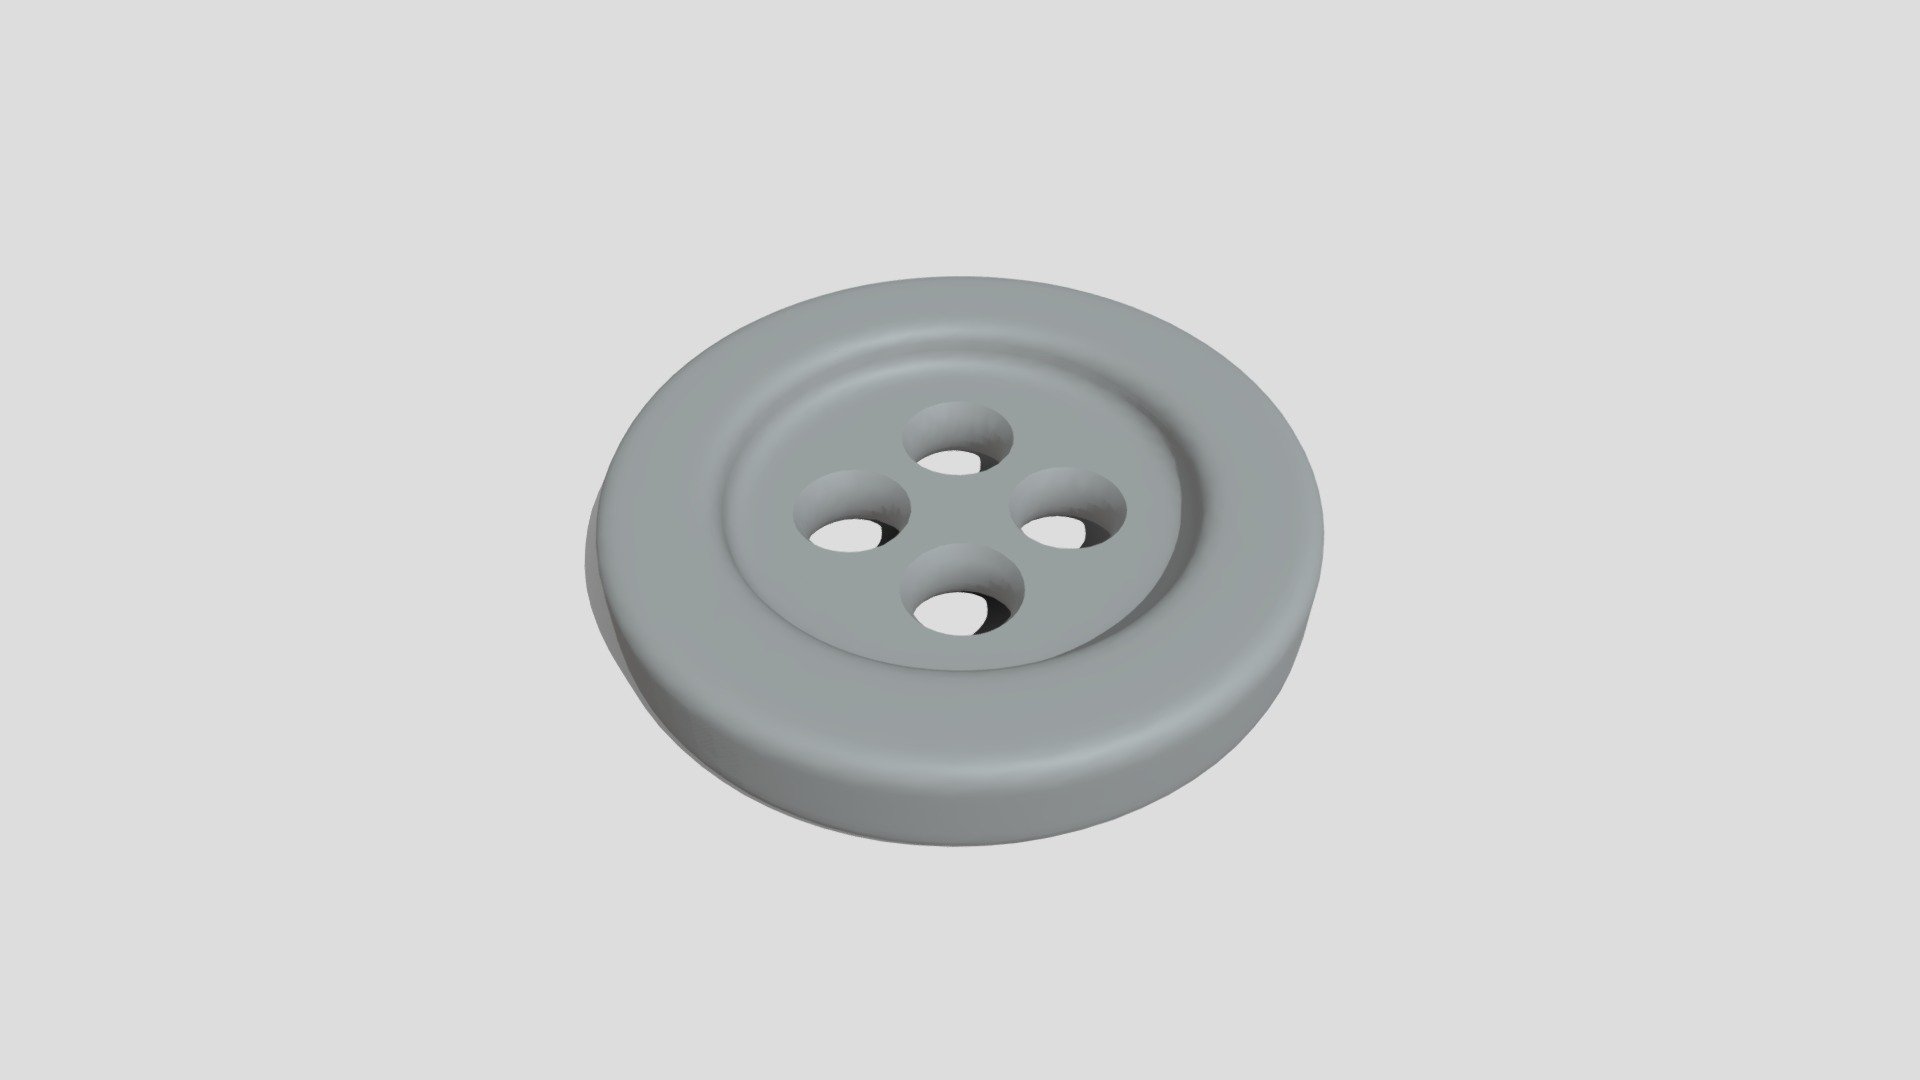 Printable Sewing Button. This Button meant to be printed only. So you can chose any PLA color you like and can print this Button easy.



This Button prints without any Supports or Brim. The Button has a high mesh Density to end up having soft edges. Print with 100% Infill and 0.1 Layerheight for a solid Result.

Sizes:

Button Diameter Ø: 1,5cm

Button Hole Diameter Ø: 2mm

Button Height: 2,5mm

Button Holes: 4


Print Settings:

Support: No

Brim: No

Layer Height: 0.1

Infill: 100% - Sewing Button 003 - 1,5cm 4 Holes 2mm - Buy Royalty Free 3D model by OctoMan 3d model